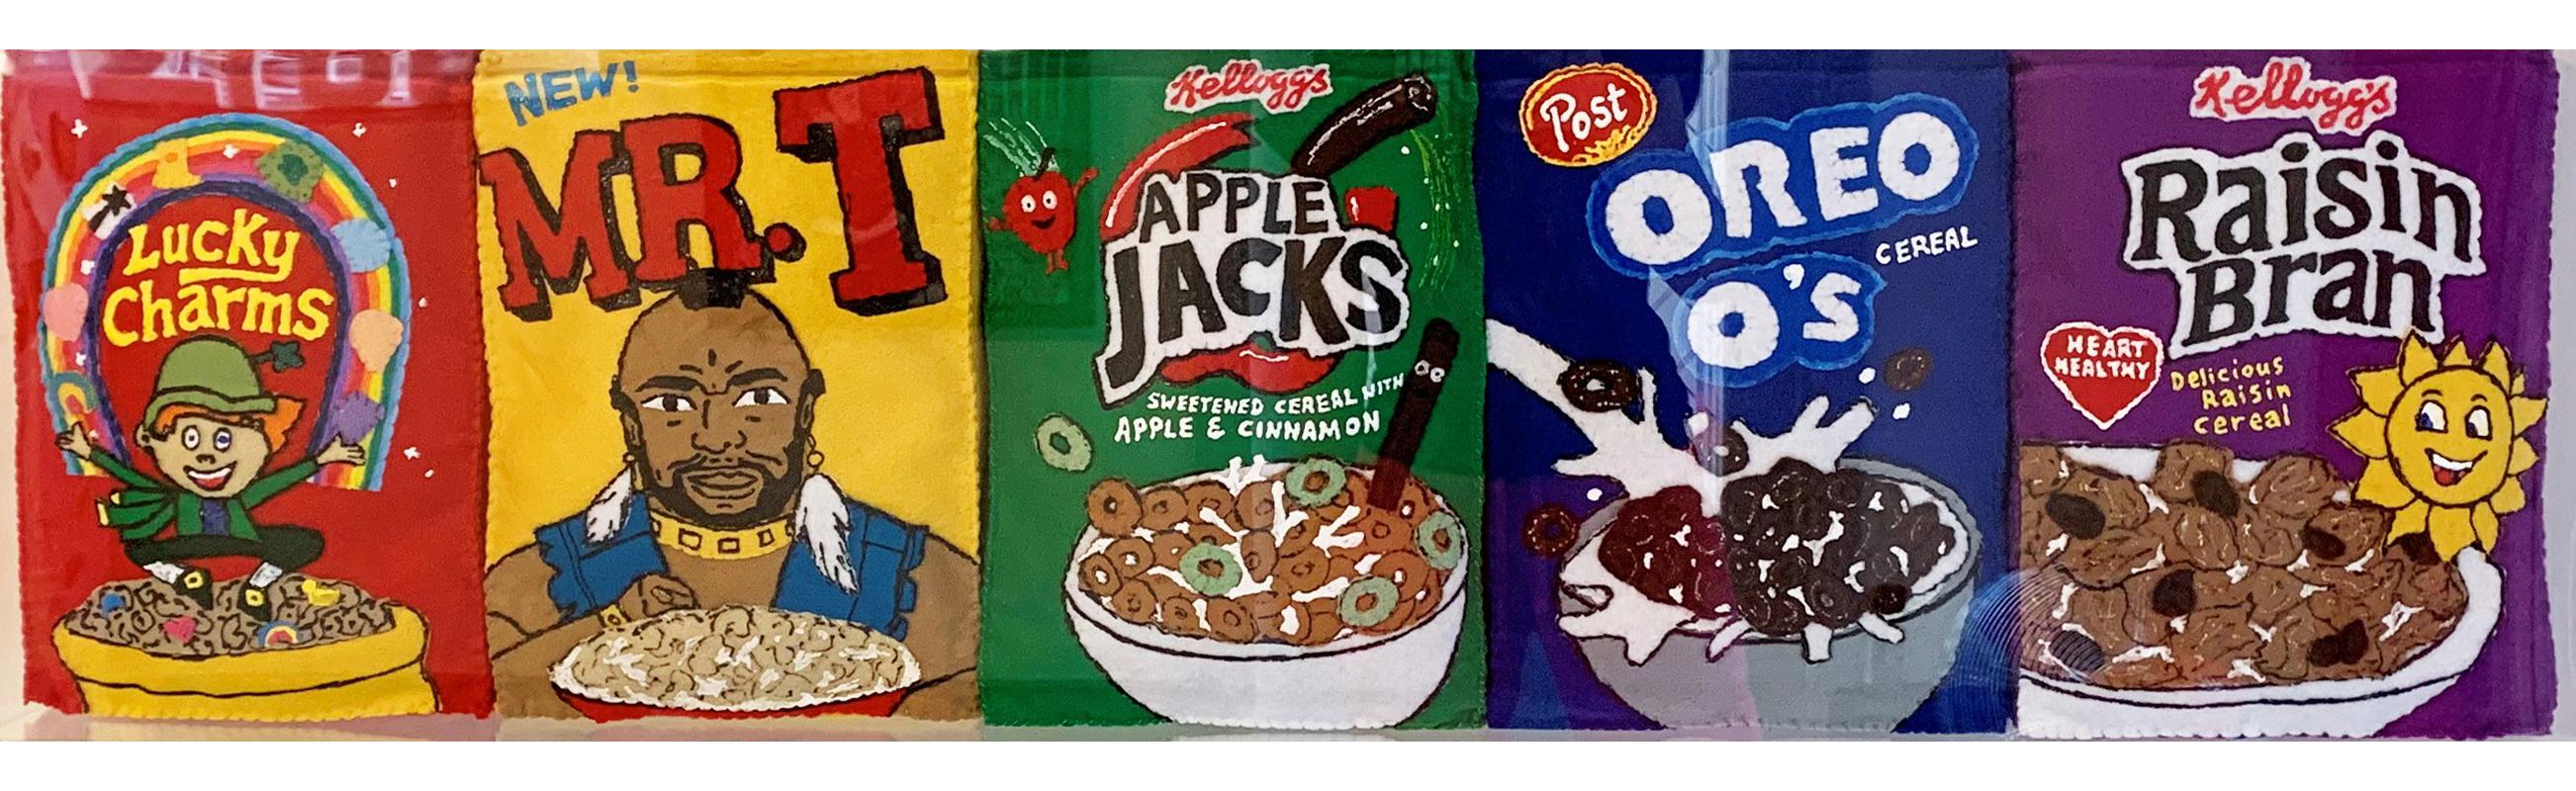 Lucy's Charms (Cereals) - Mixed Media Art by Lucy Sparrow